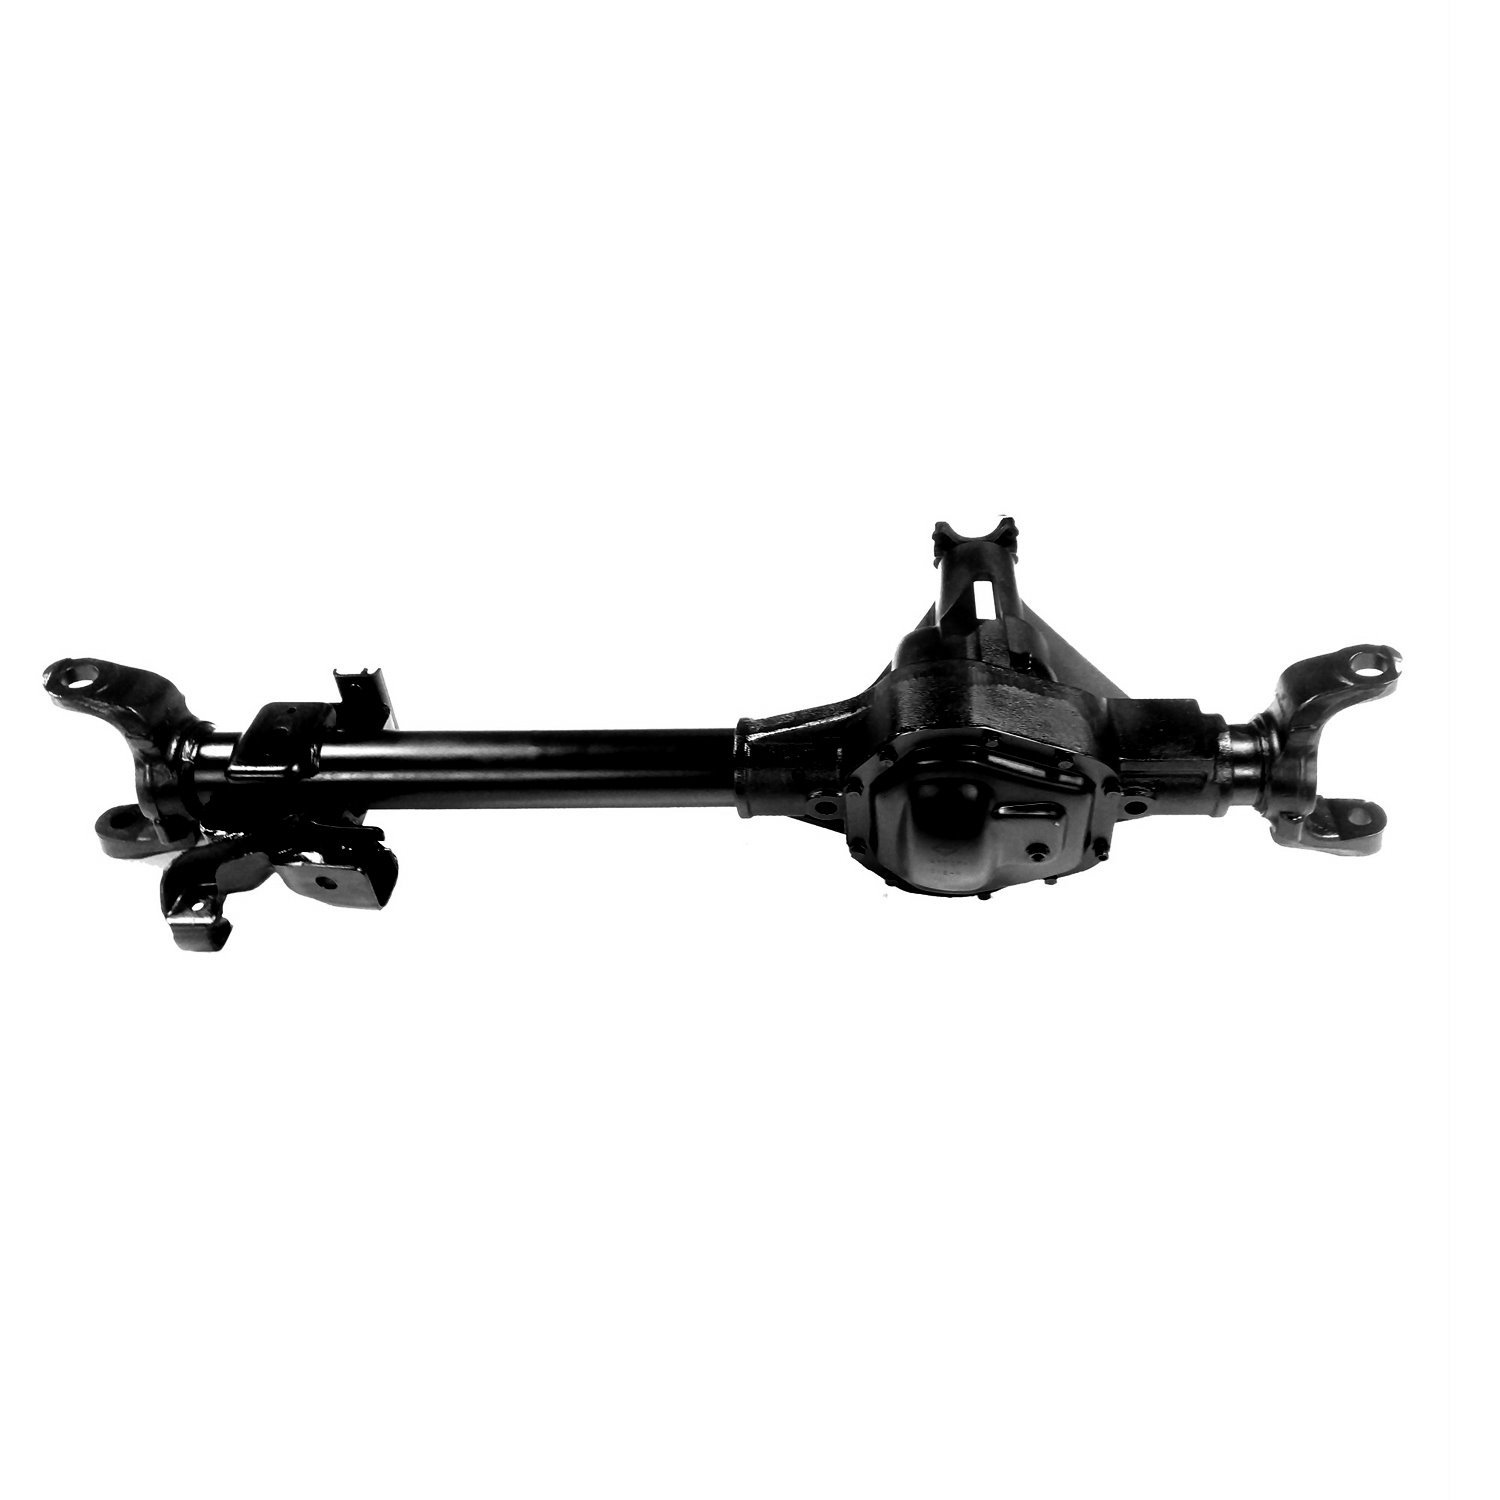 Remanufactured Complete Axle Assembly for Dana 60 01-04 Ford F350 4.30, DRW, 4 Wheel ABS